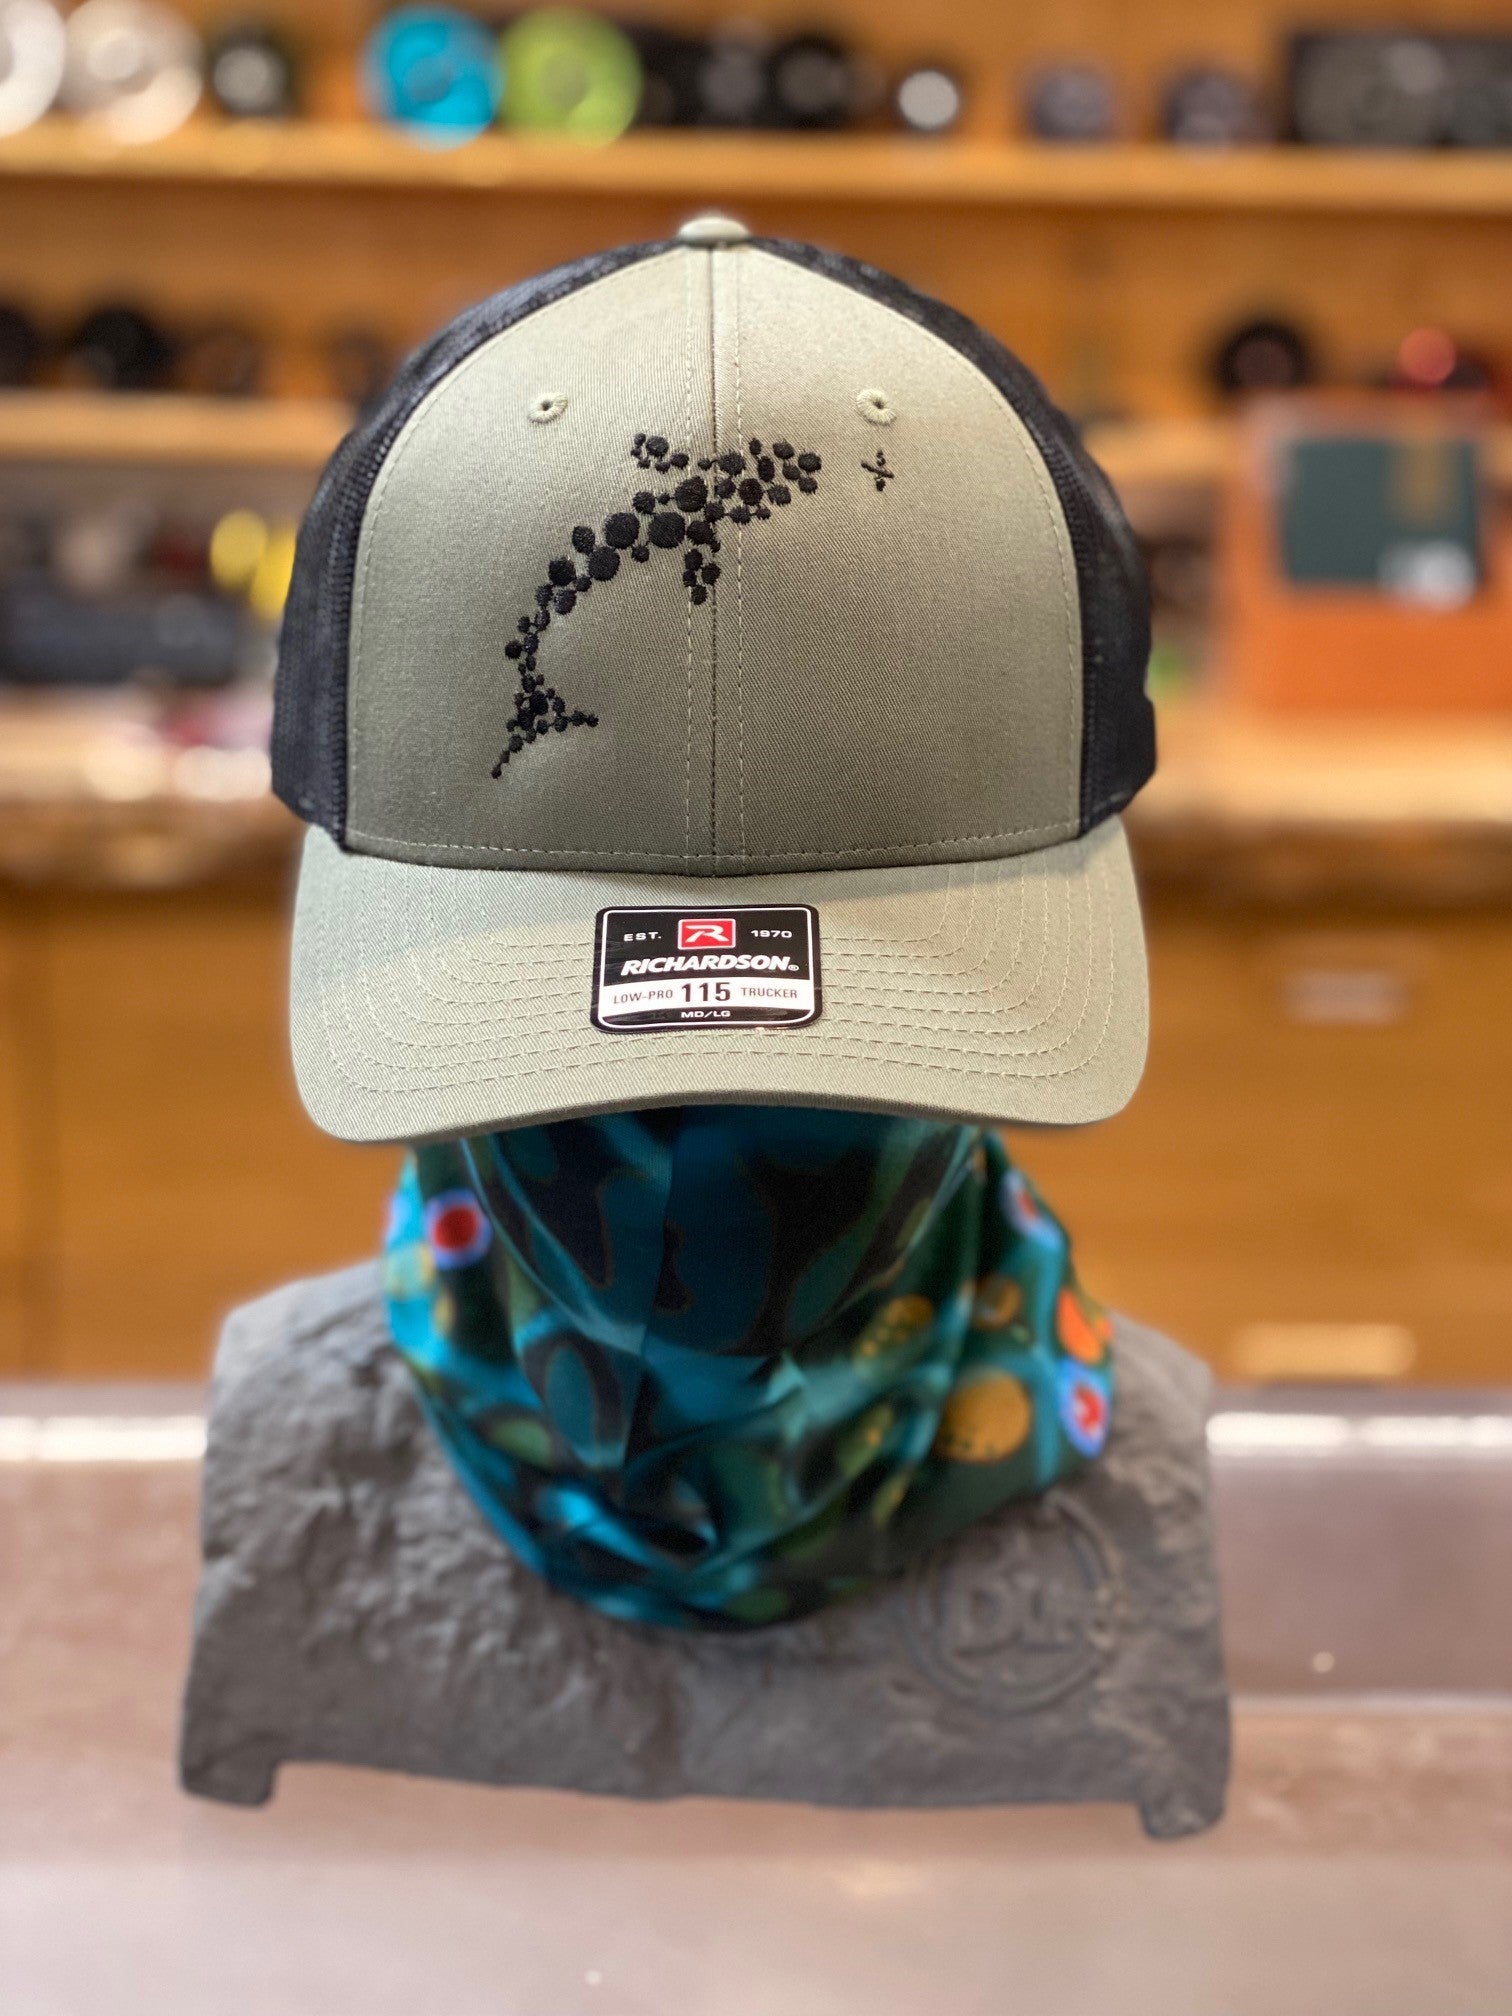 Out Fly Fishing Branded Low Pro Trucker Logo Hats